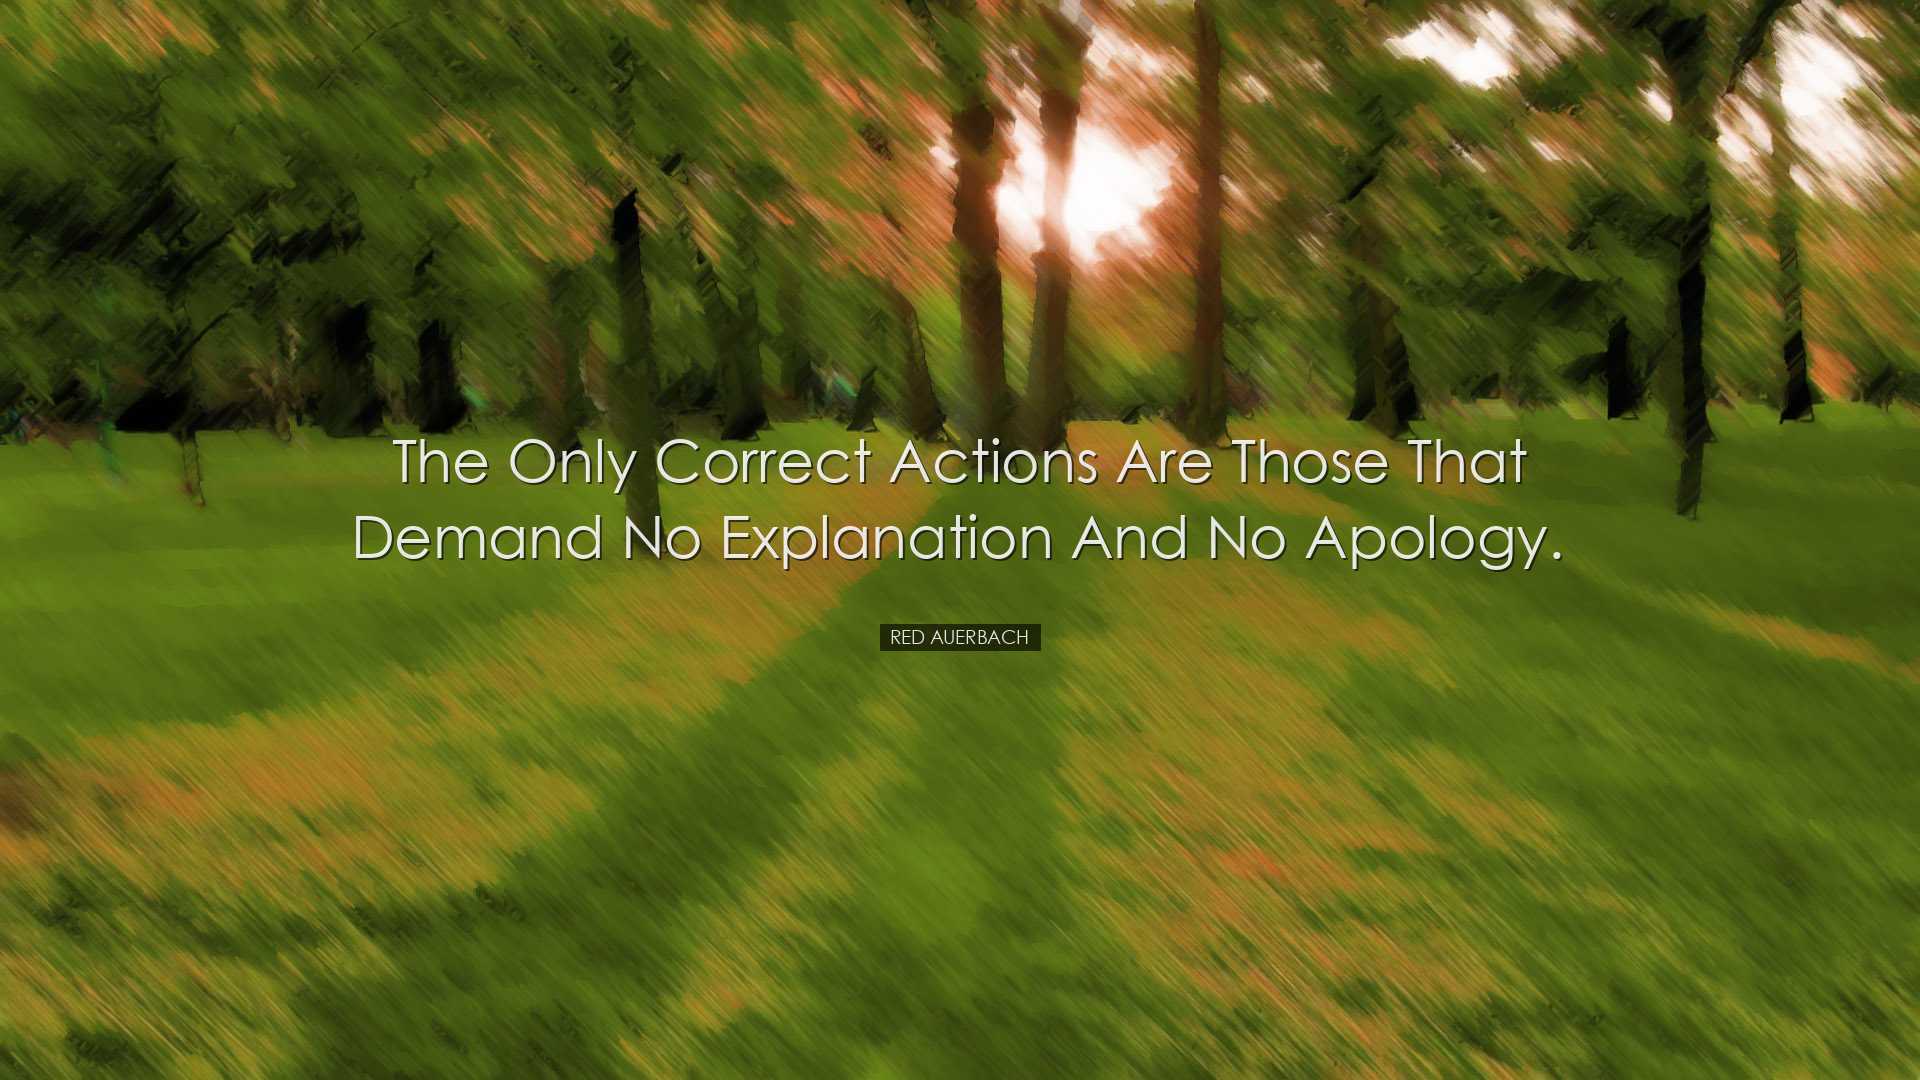 The only correct actions are those that demand no explanation and